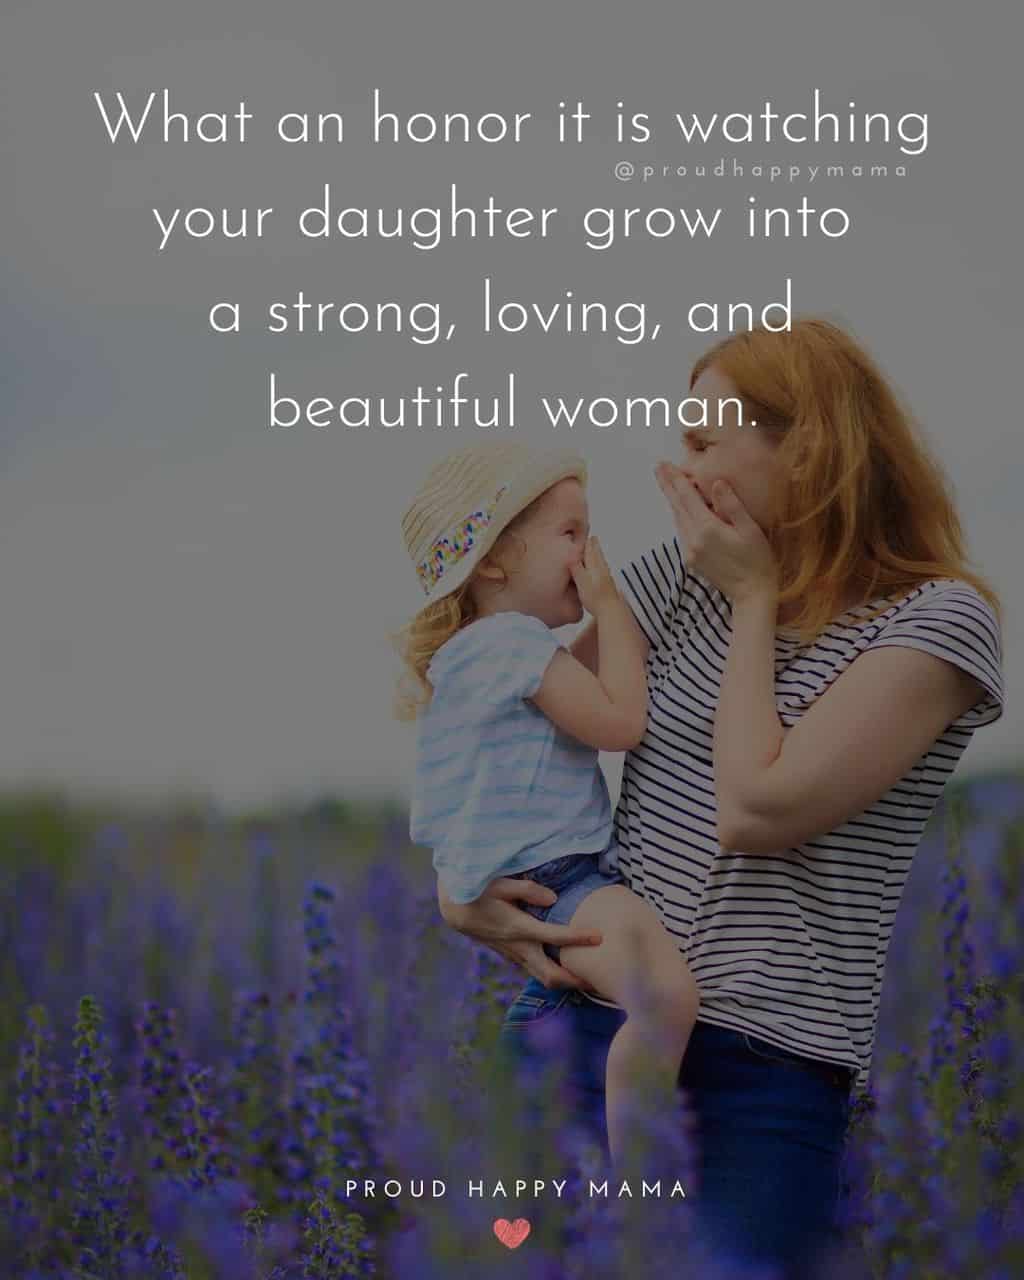 caption for my daughter - ‘What an honor it is watching your daughter grow into a strong, loving, and beautiful woman.’